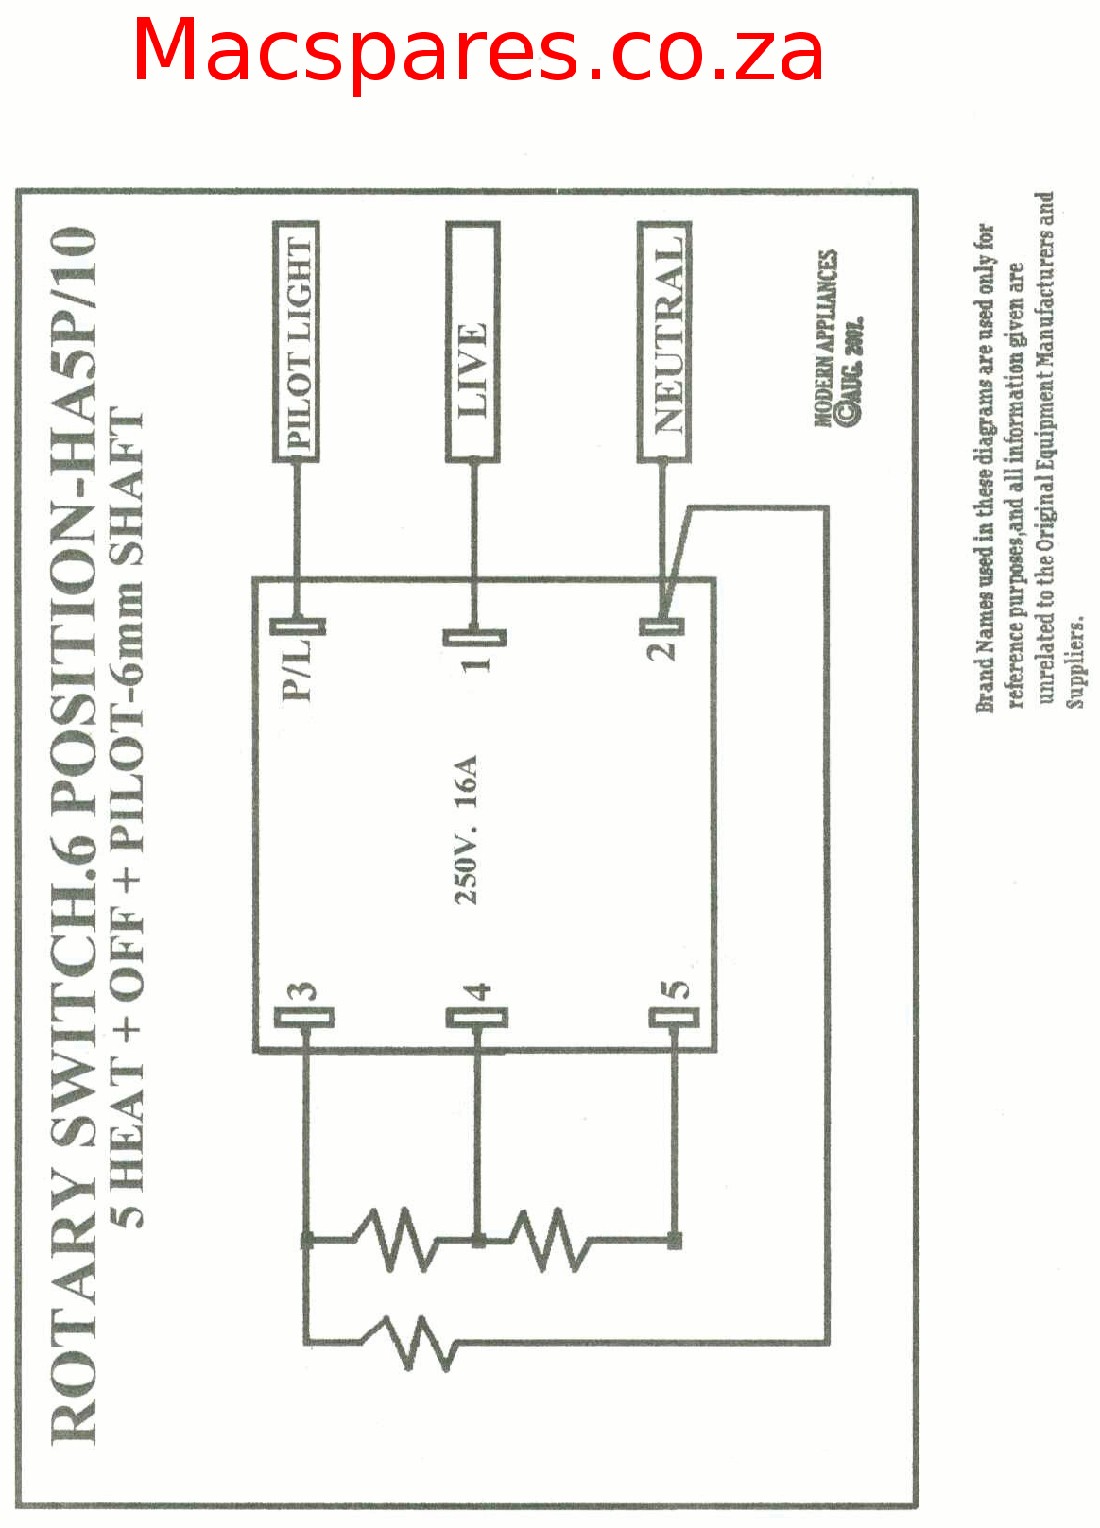 ROTARY SWITCH 6 POSITION HA Stove Wiring Diagram